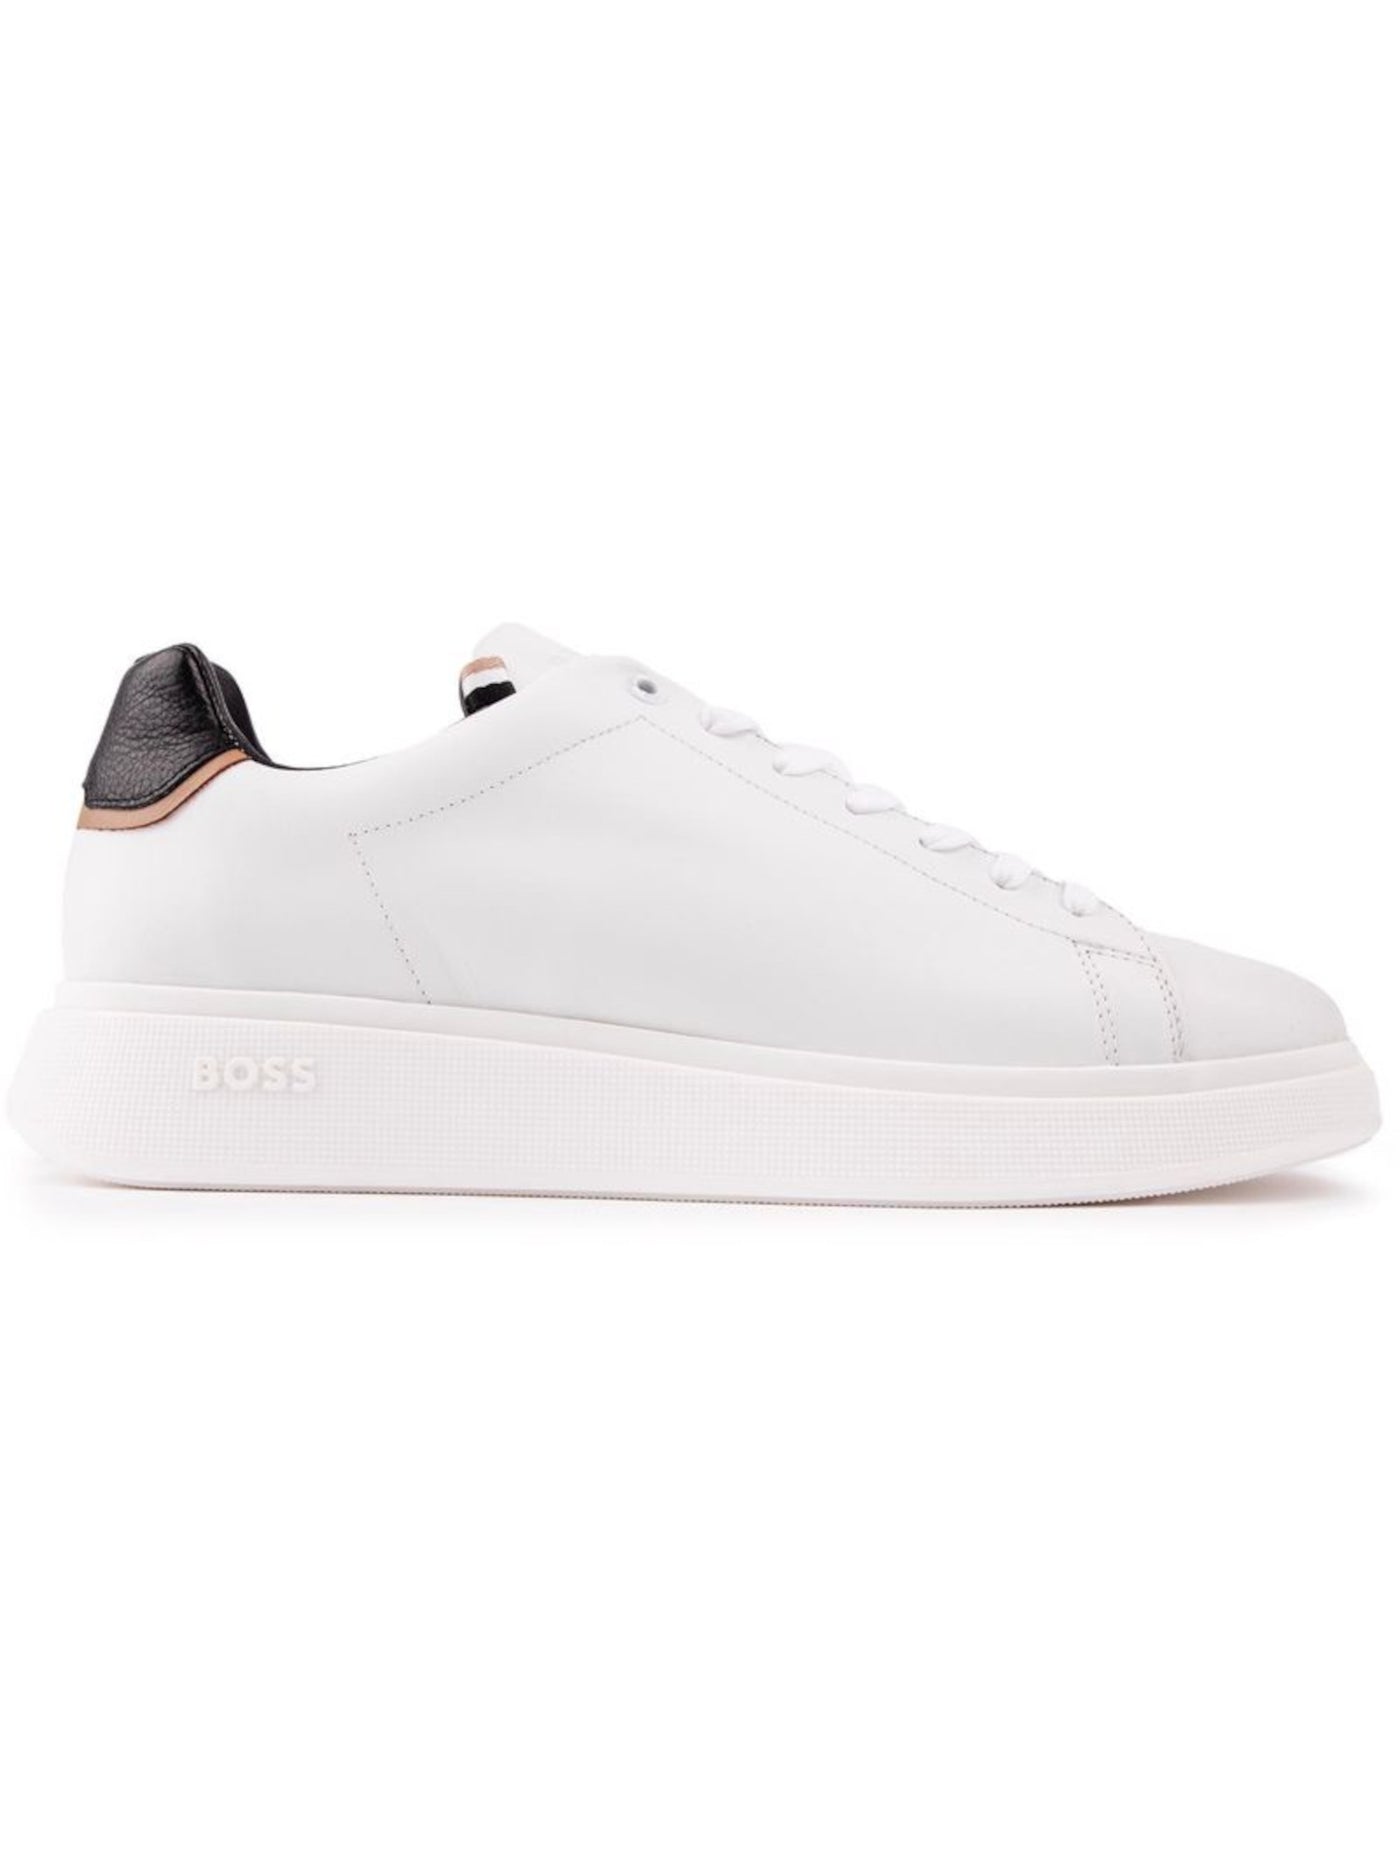 BOSS Mens White Logo Padded Bulton Round Toe Wedge Lace-Up Leather Sneakers Shoes 6